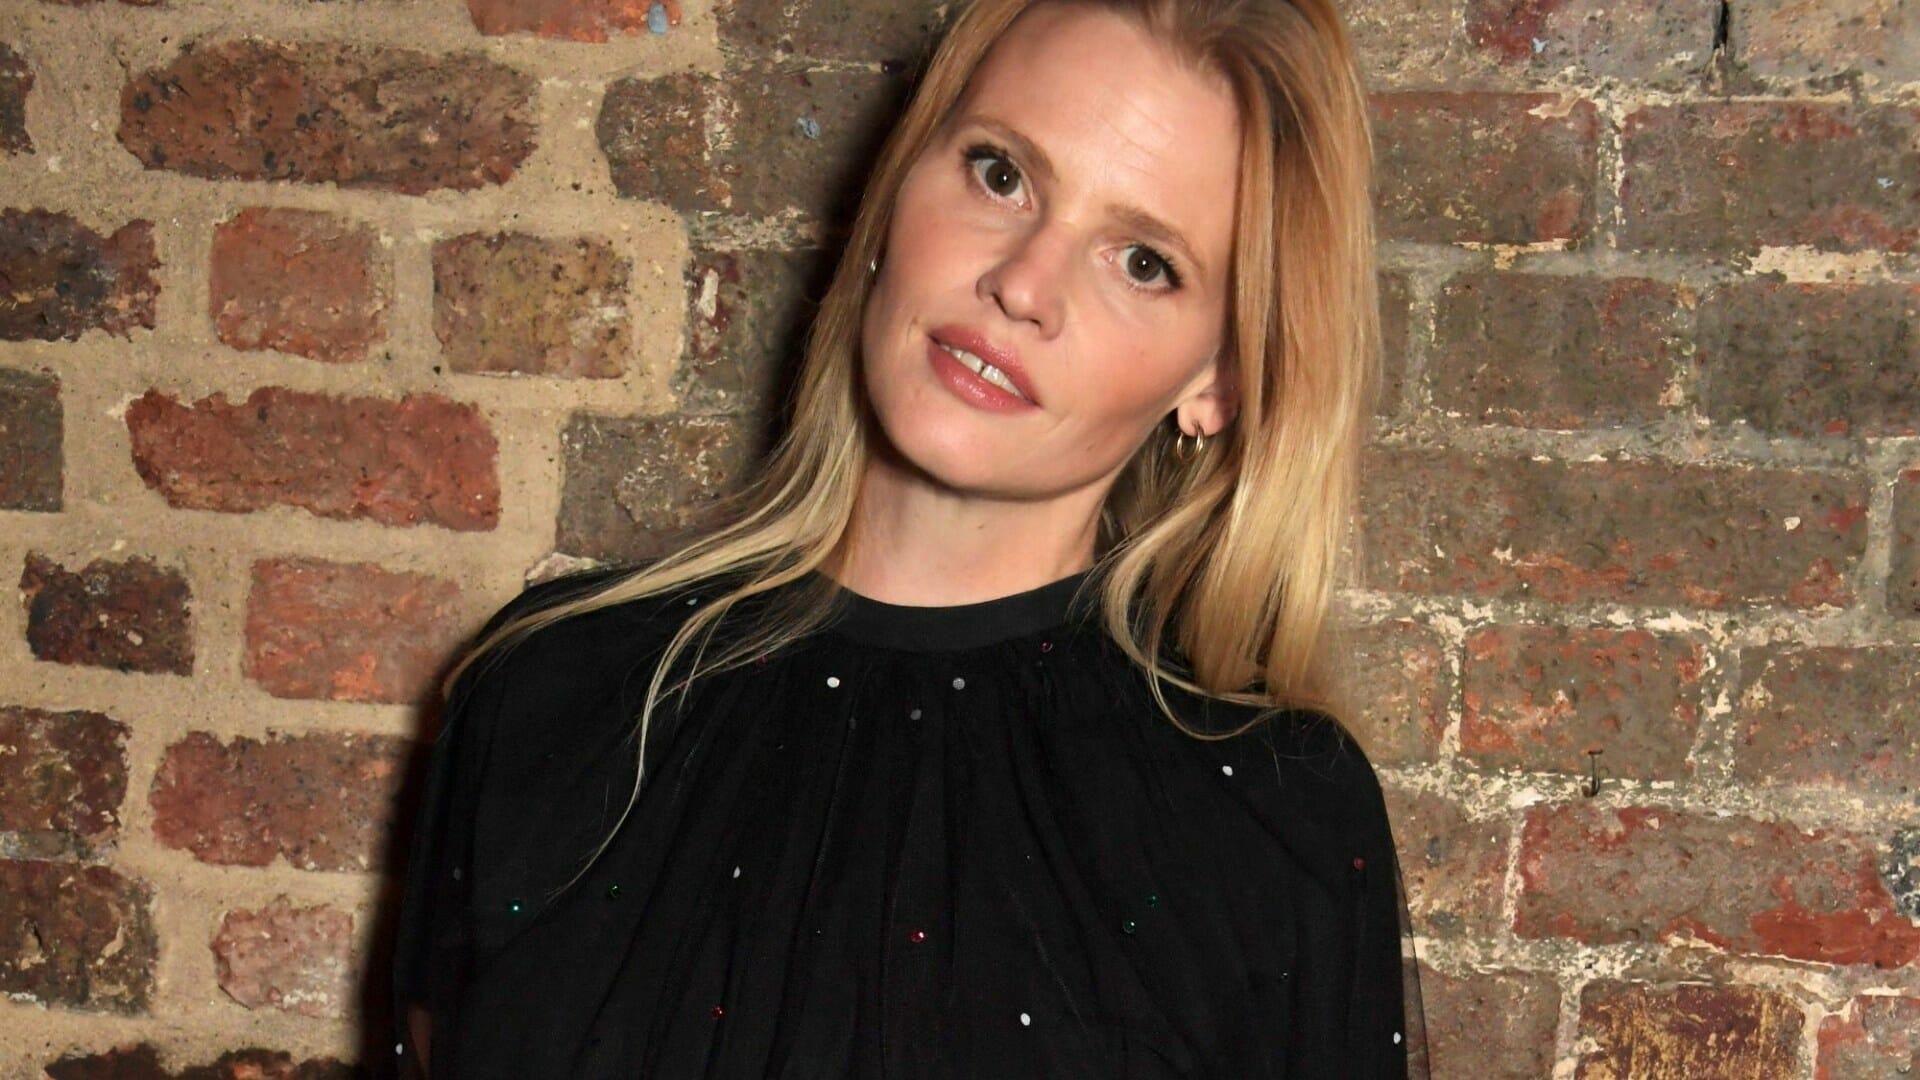 David Walliams' model ex Lara Stone gives birth to second son and reveals adorable name